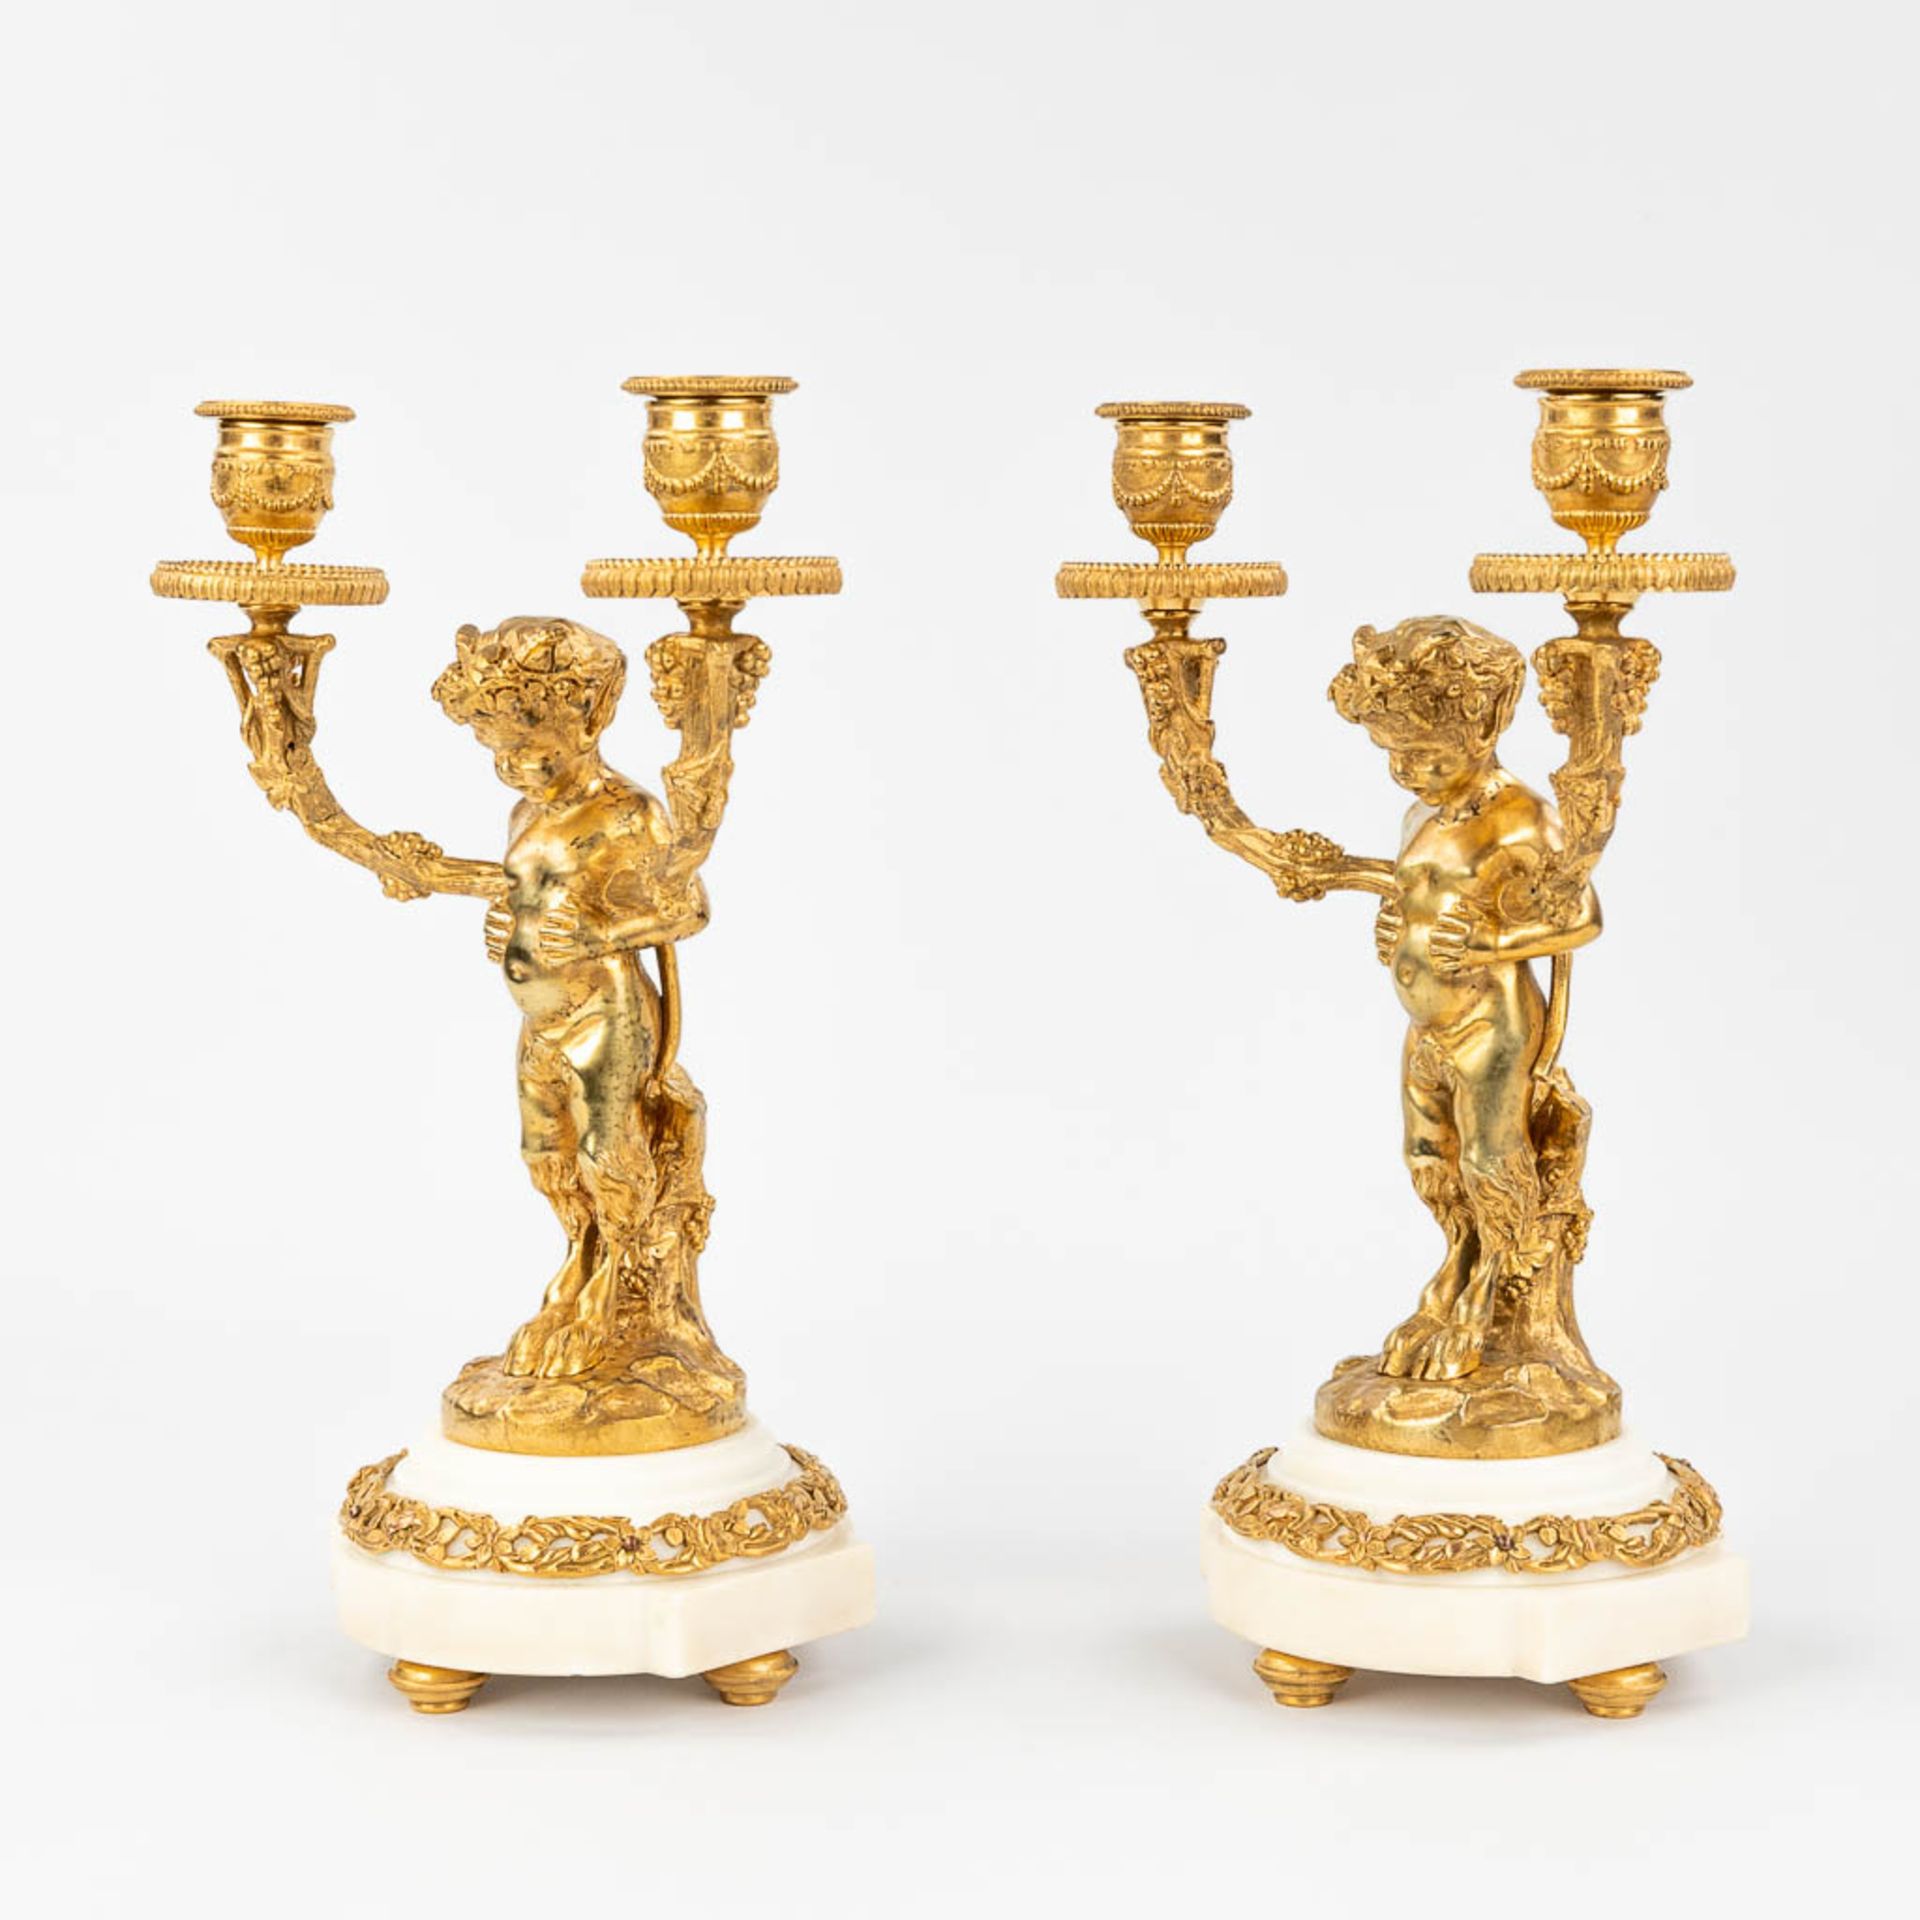 A pair of candelabra with Satyr figurines, made of gold-plated bronze. (13 x 21 x 30,5cm) - Bild 3 aus 13